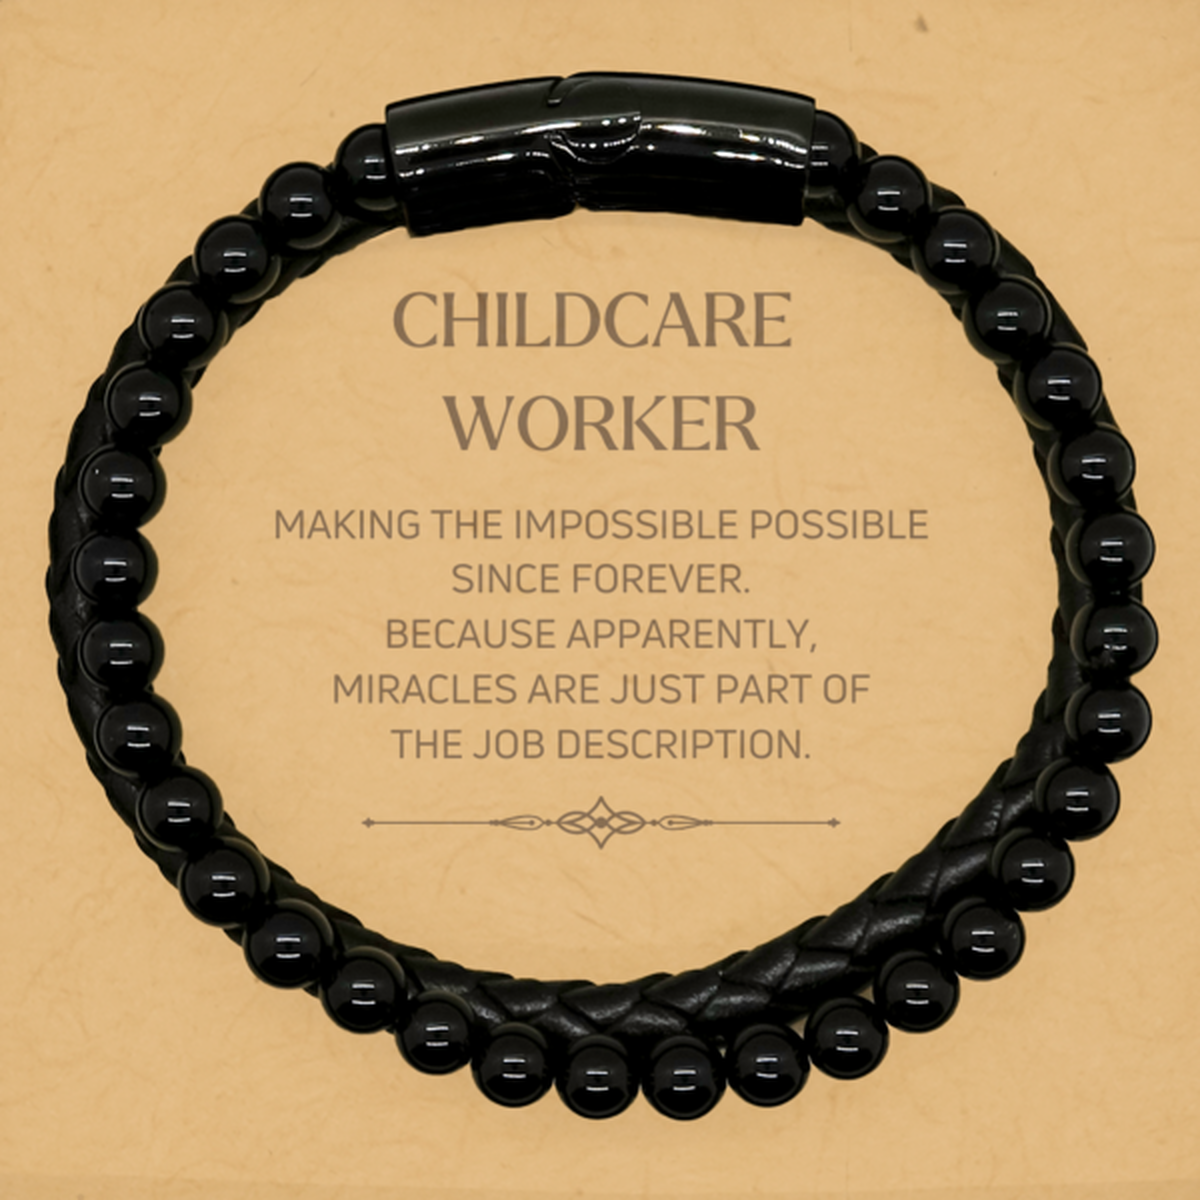 Funny Childcare Worker Gifts, Miracles are just part of the job description, Inspirational Birthday Stone Leather Bracelets For Childcare Worker, Men, Women, Coworkers, Friends, Boss